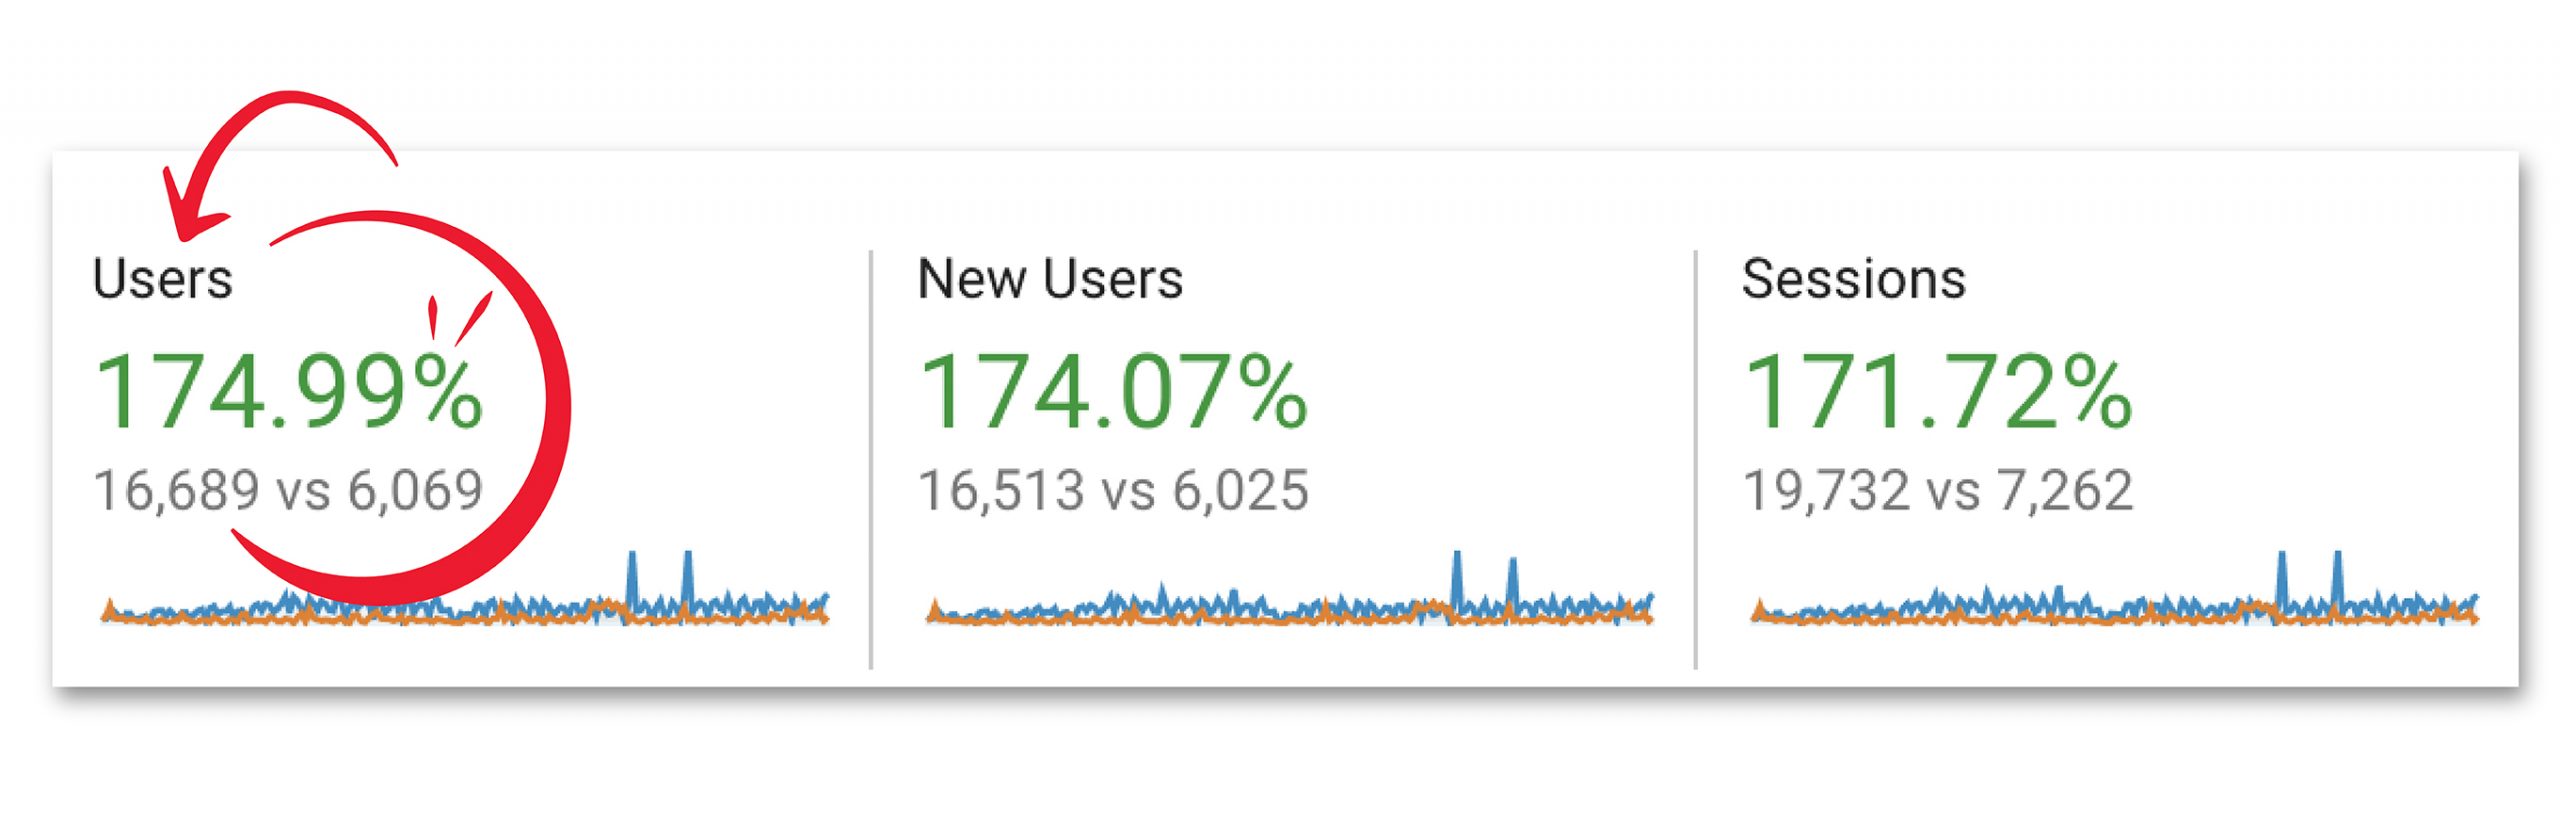 Google Analytics users increase by 175%